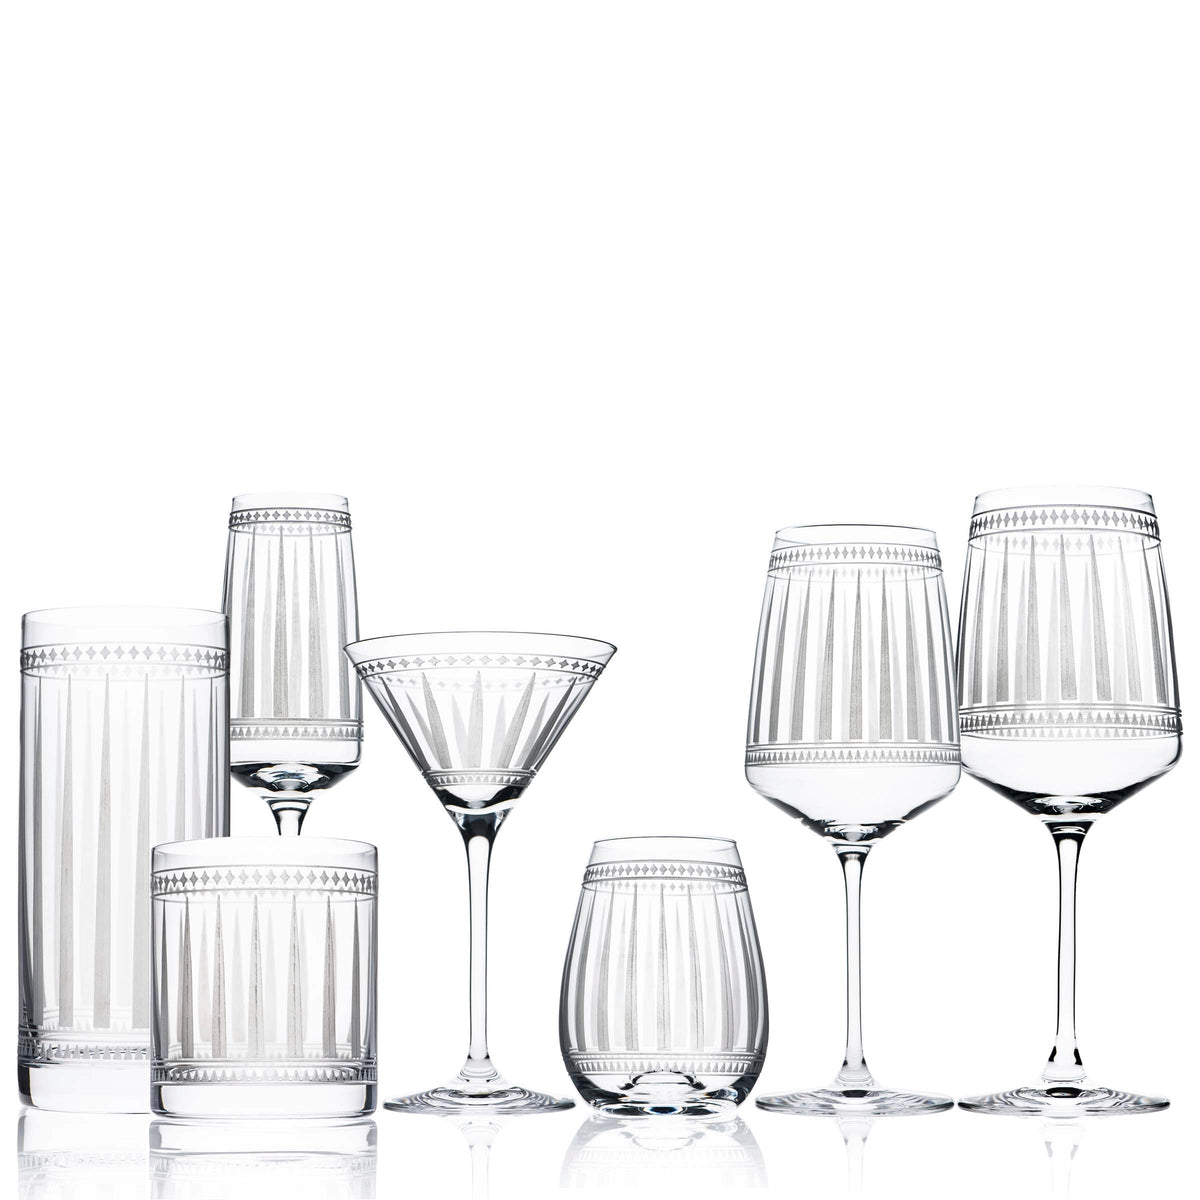 A set of Marrakech Short Drink Glasses from Caskata Artisanal Home displaying art deco forms on a white background.